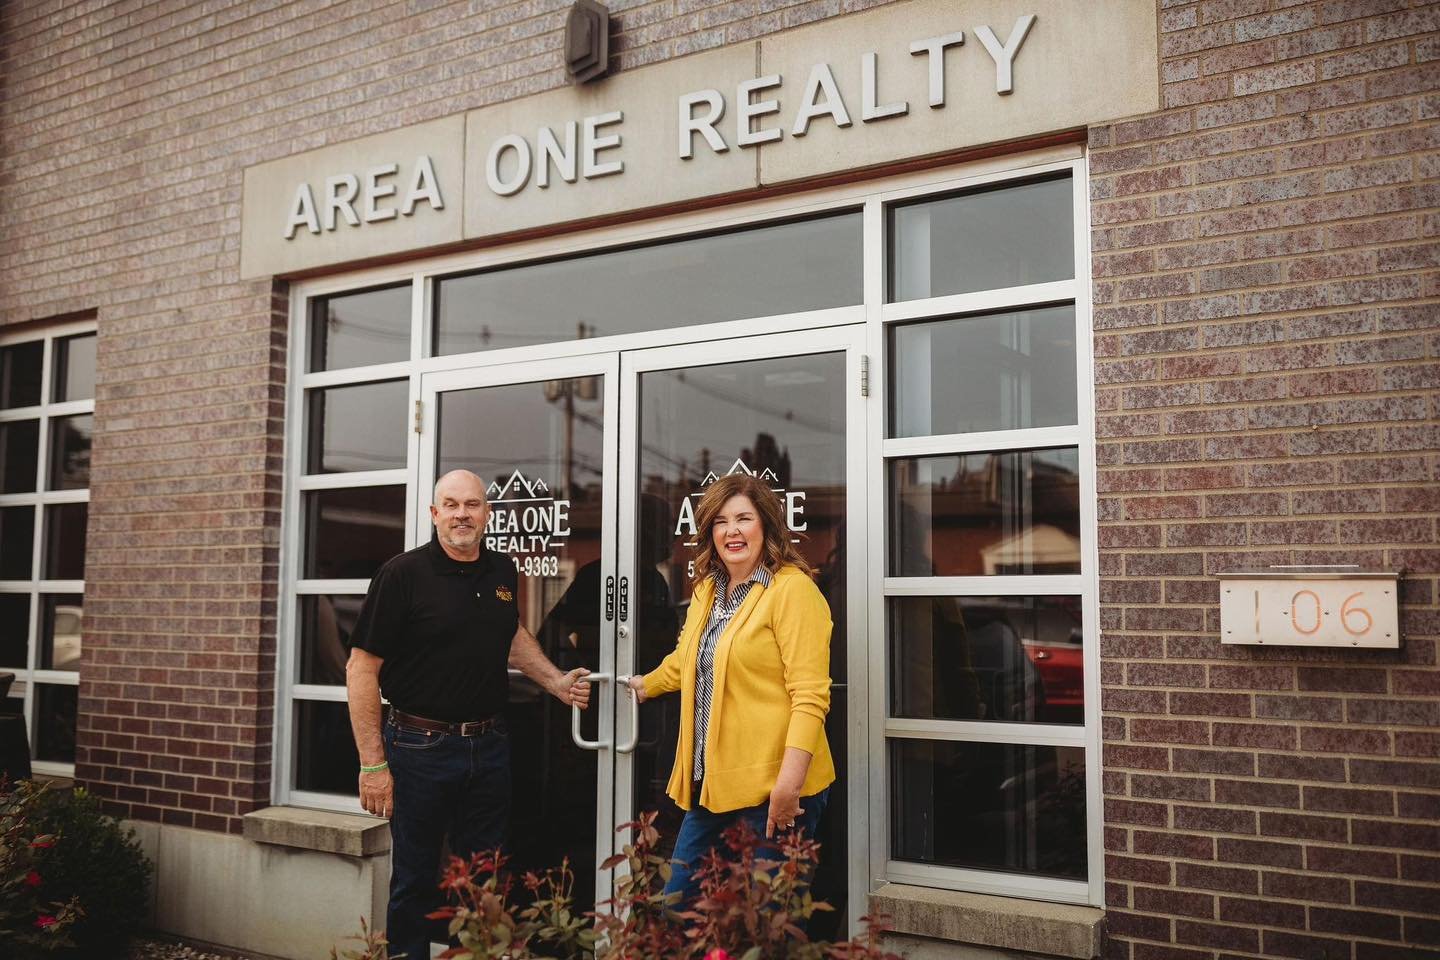 🏡 ⏰Looking  to BUY or SELL a home⏰ 🏡 

Now is the time to get those homes 🏡 LISTED &amp; SOLD with Area One Realty! At Area One Realty are proud of the fact that we are your Local, Hometown, Full Service Real Estate Company located in the Downtown